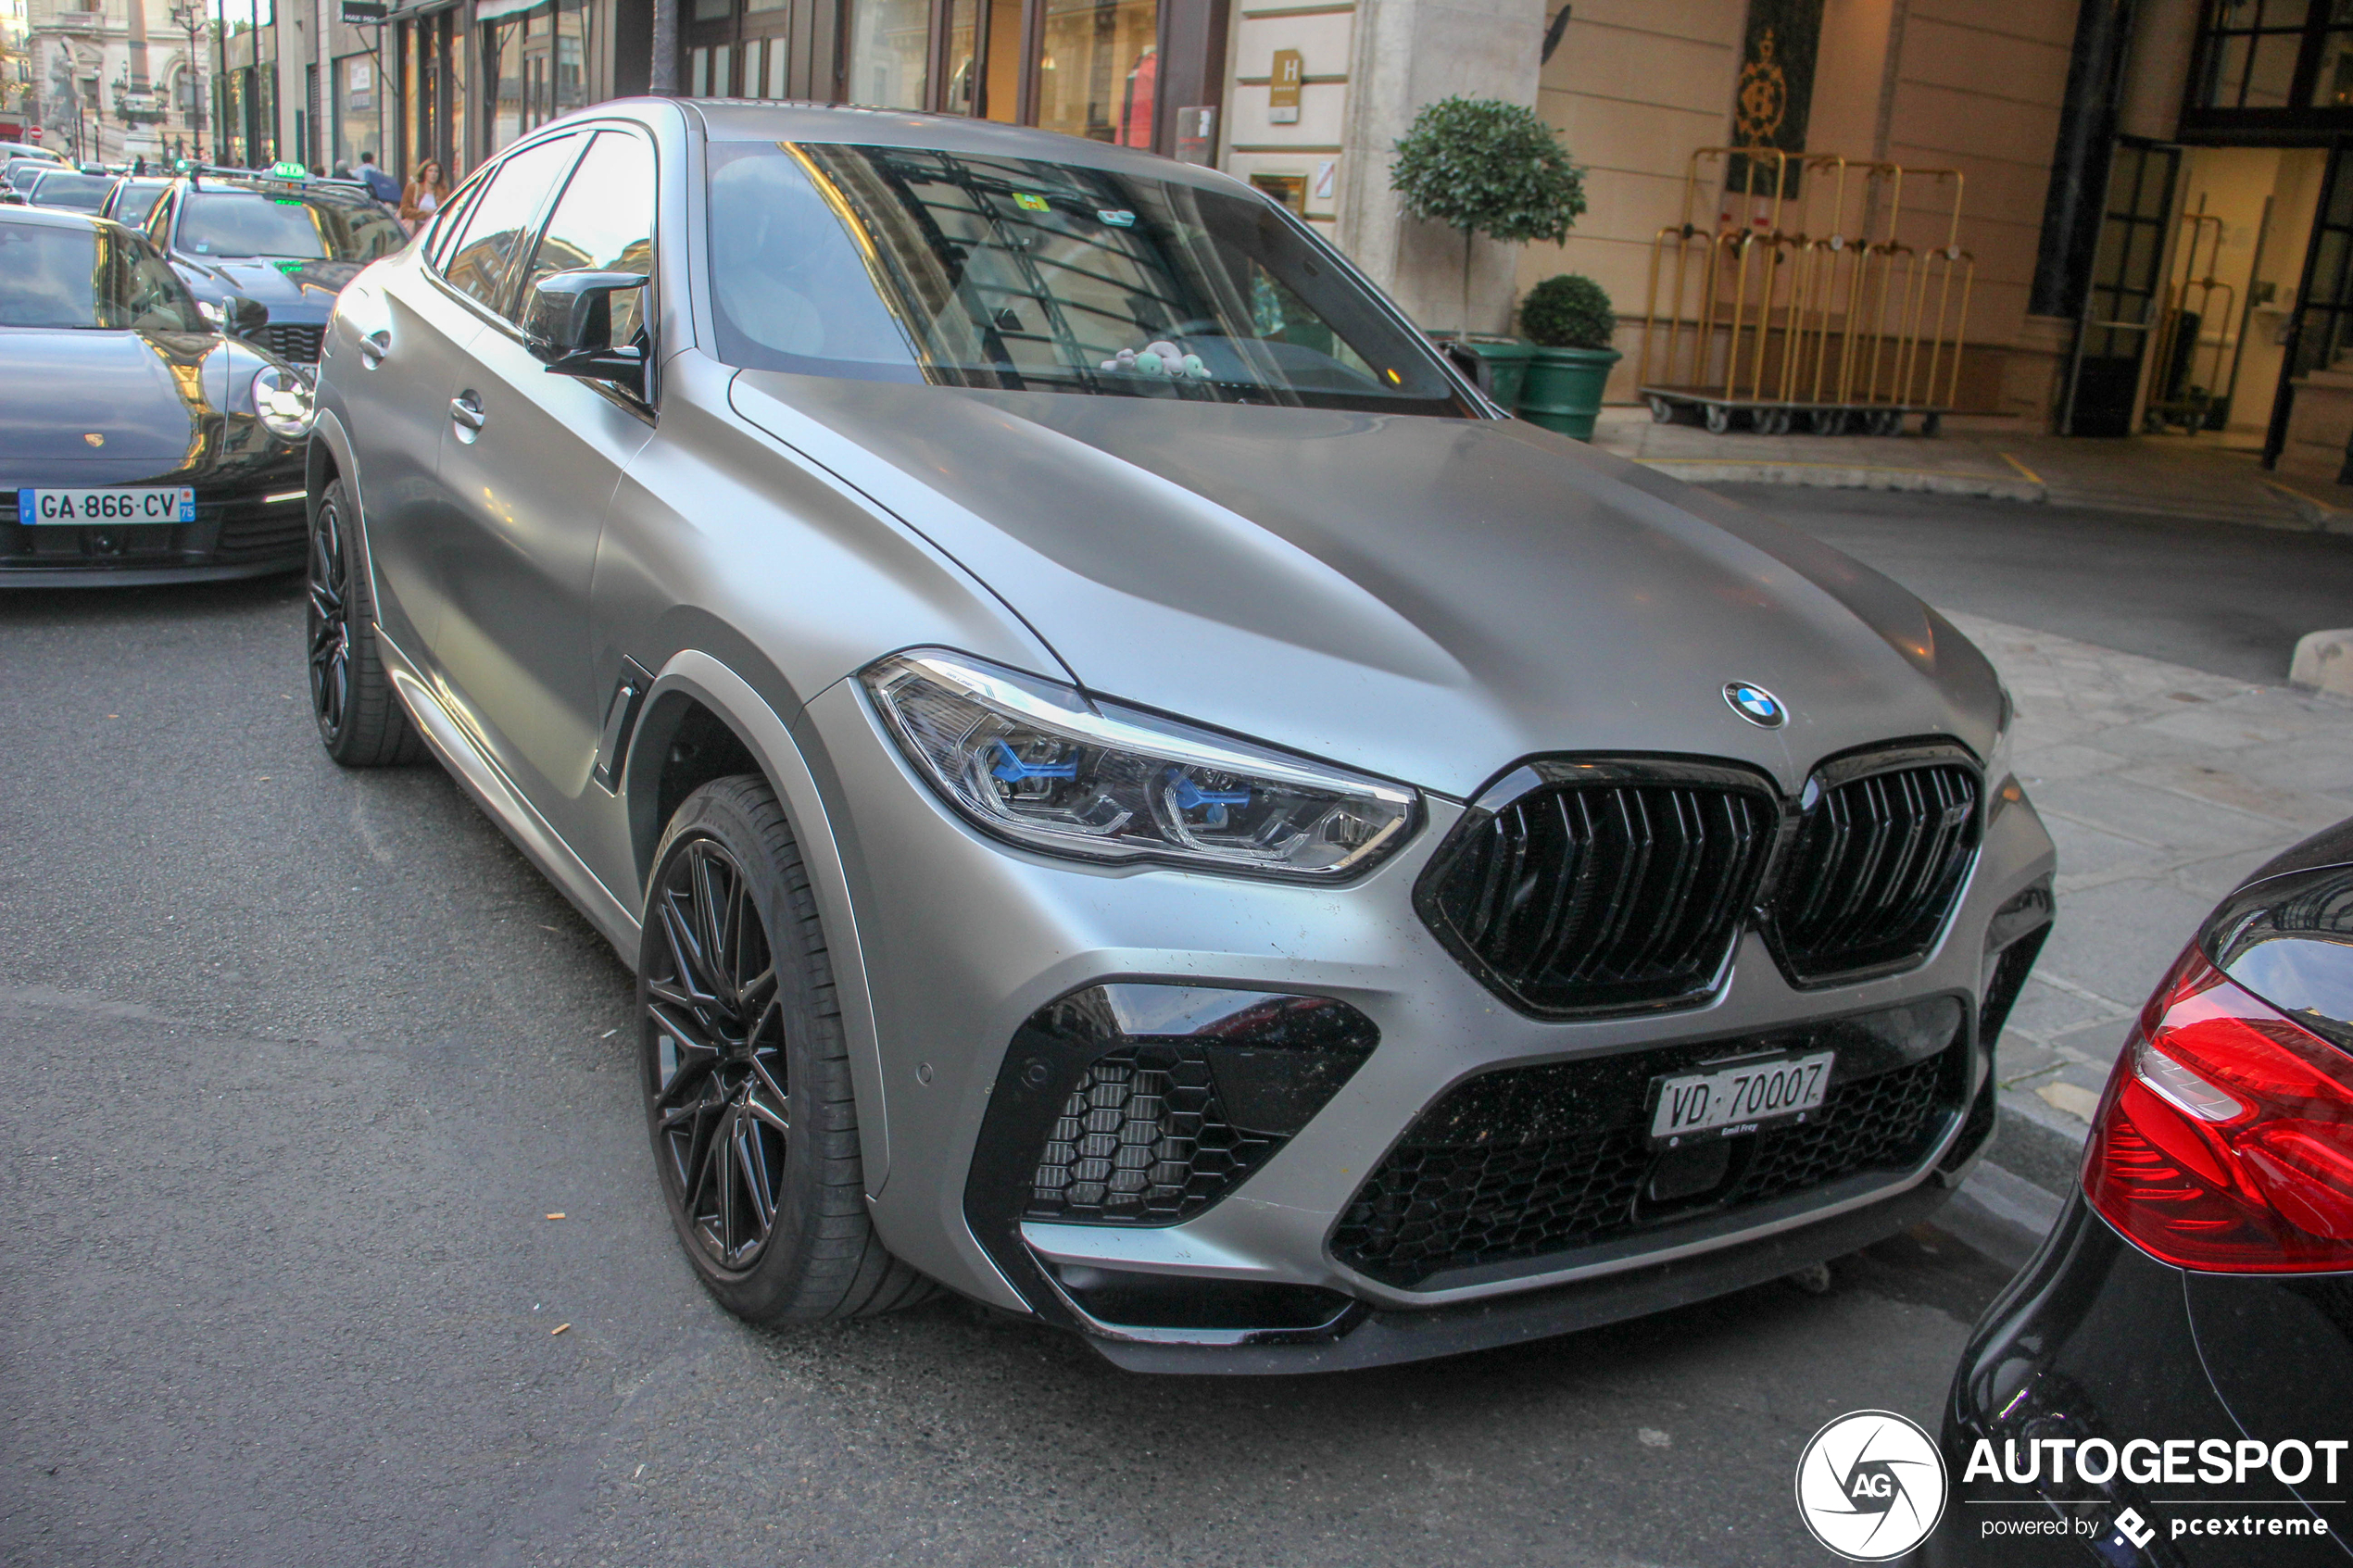 BMW X6 has controversial look - Roseville Today